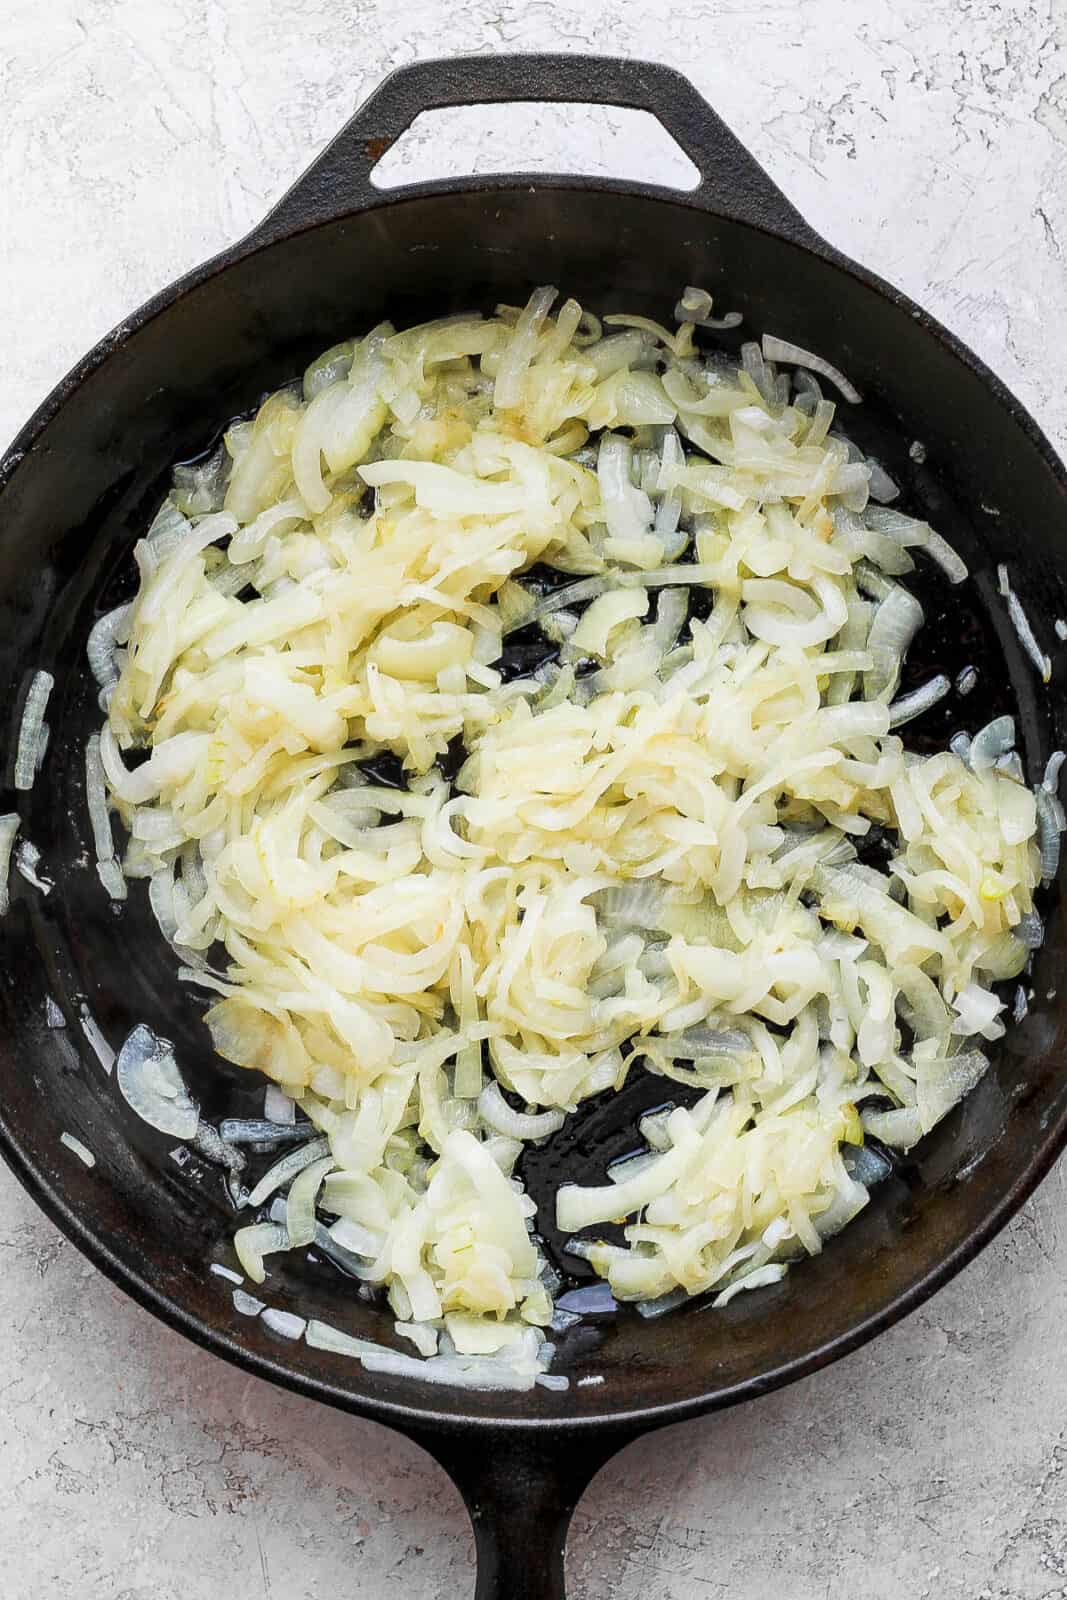 Onion slices beginning to caramelize in the skillet.